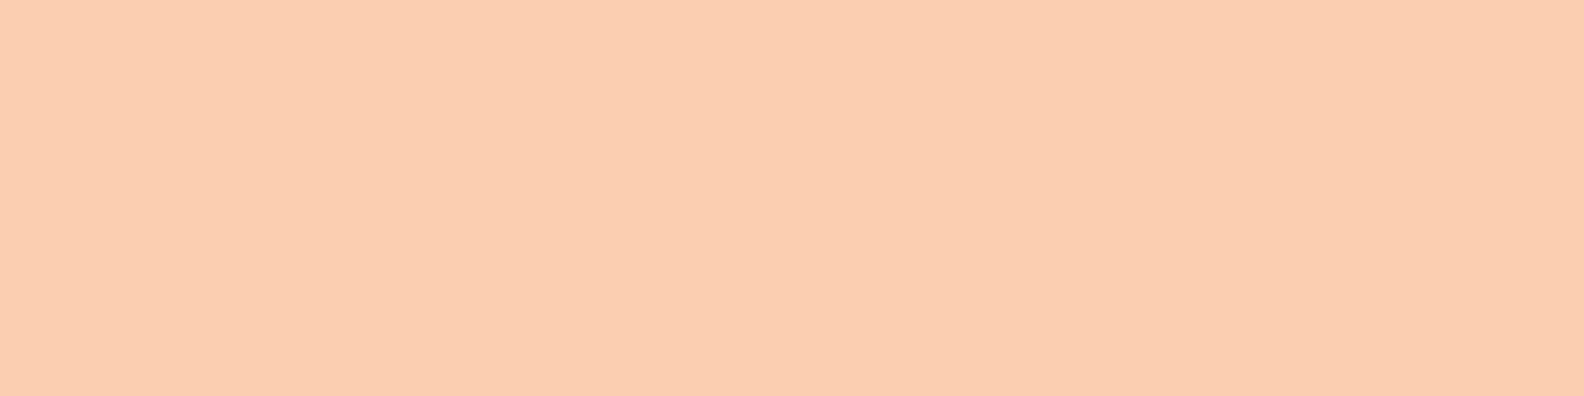 1584x396 Apricot Solid Color Background